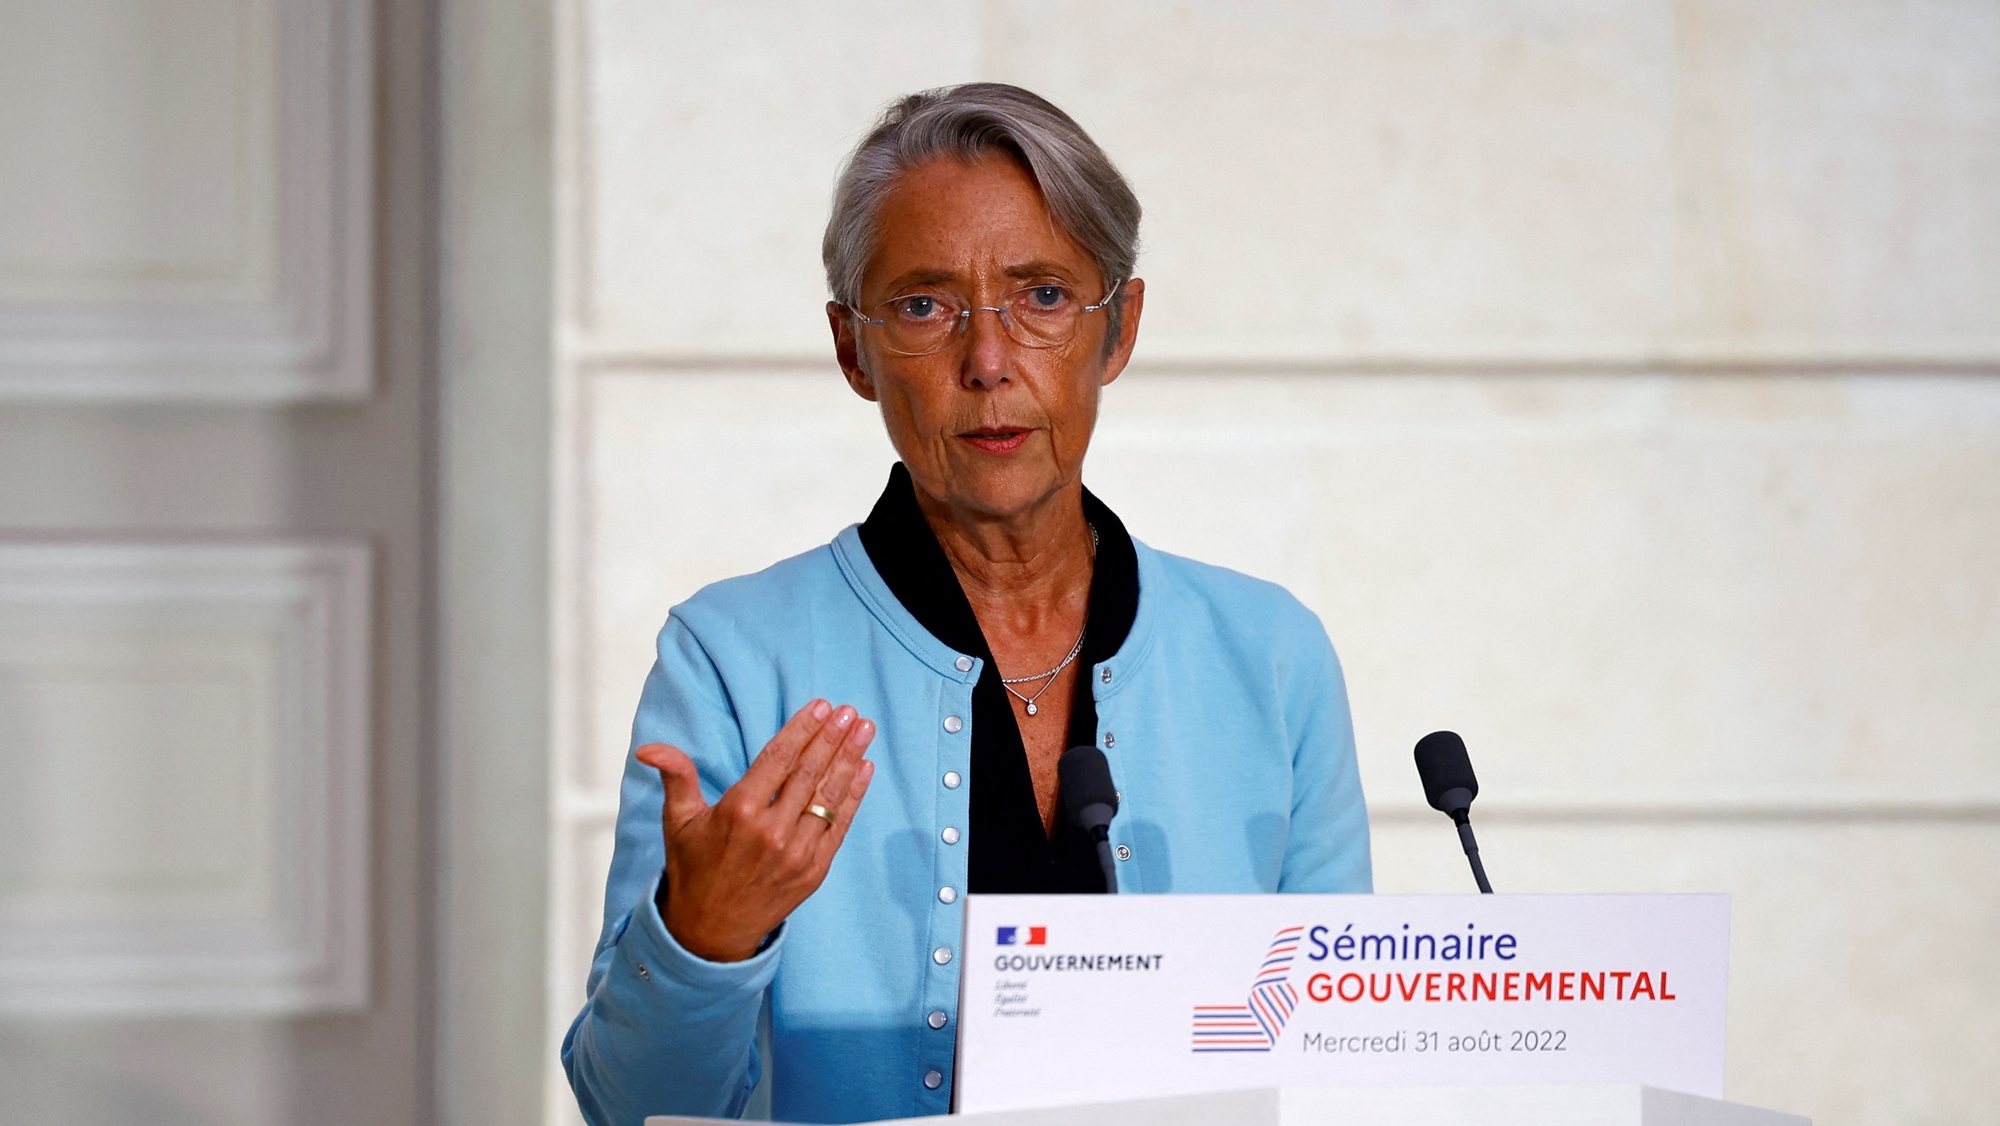 epa10150106 French Prime Minister Elisabeth Borne delivers a statement following a weekly cabinet meeting and a government seminar at the Elysee Palace in Paris, France, 31 August 2022.  EPA/SARAH MEYSSONNIER / POOL  MAXPPP OUT